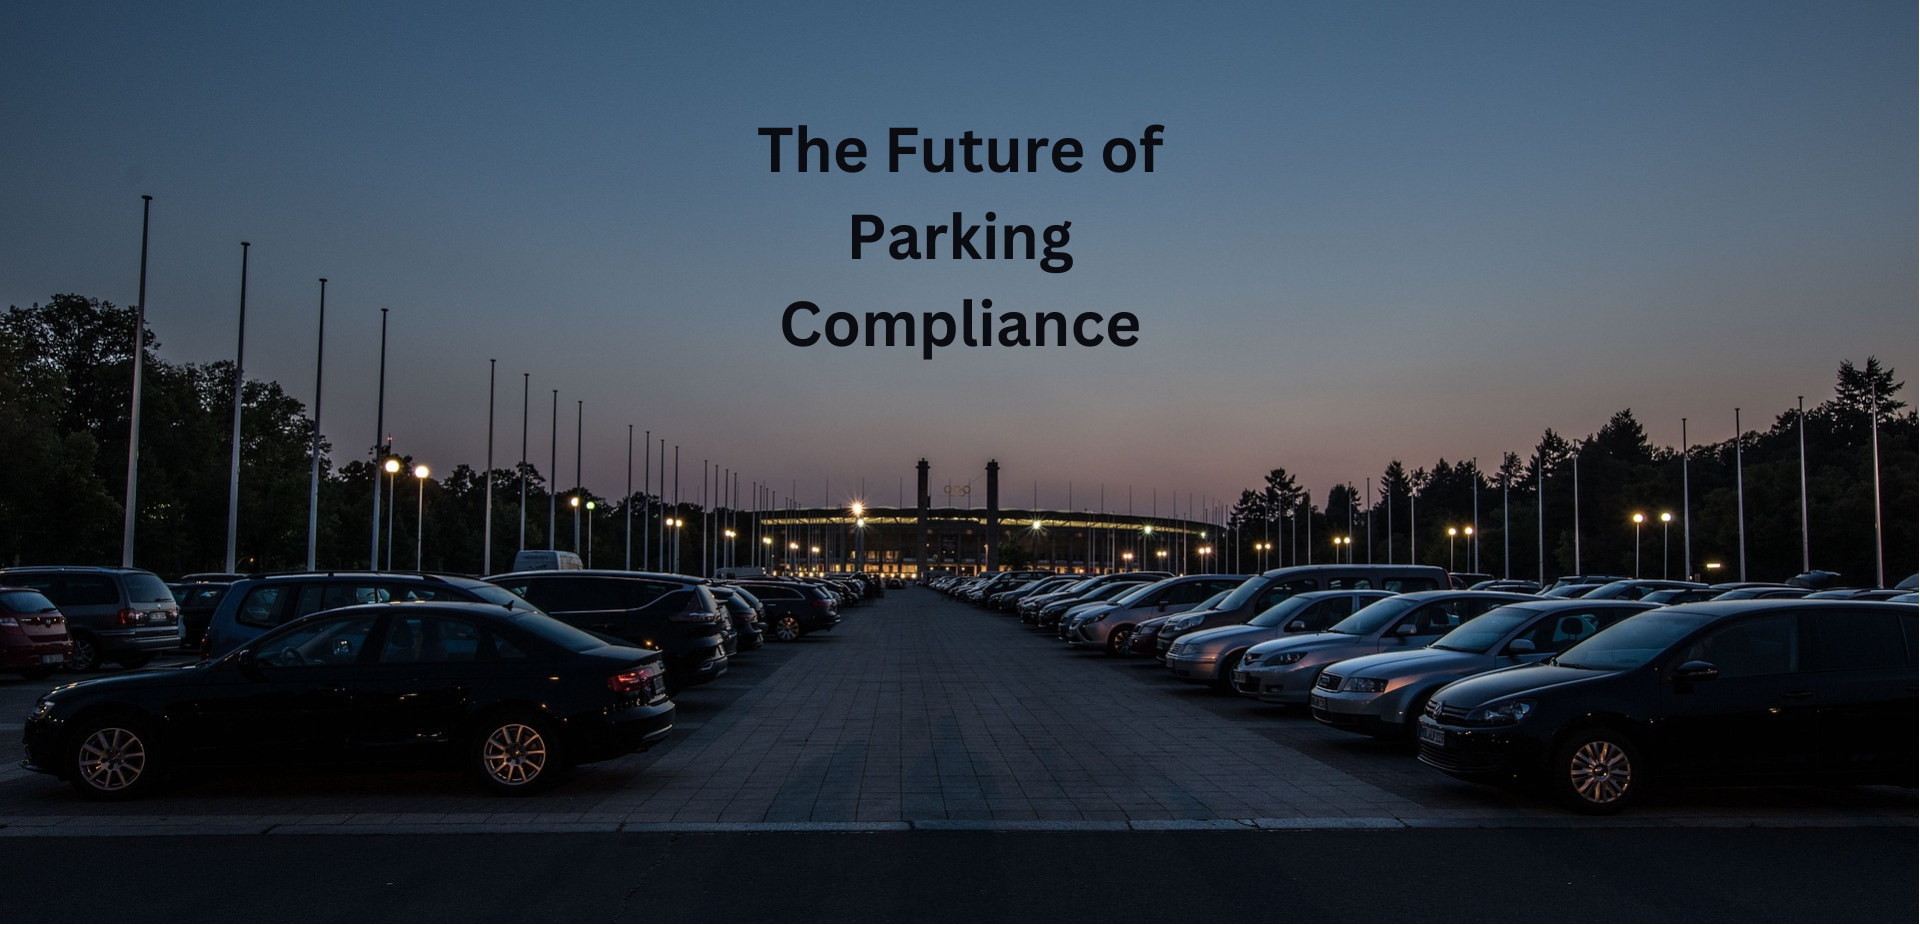 The Future of Parking Compliance